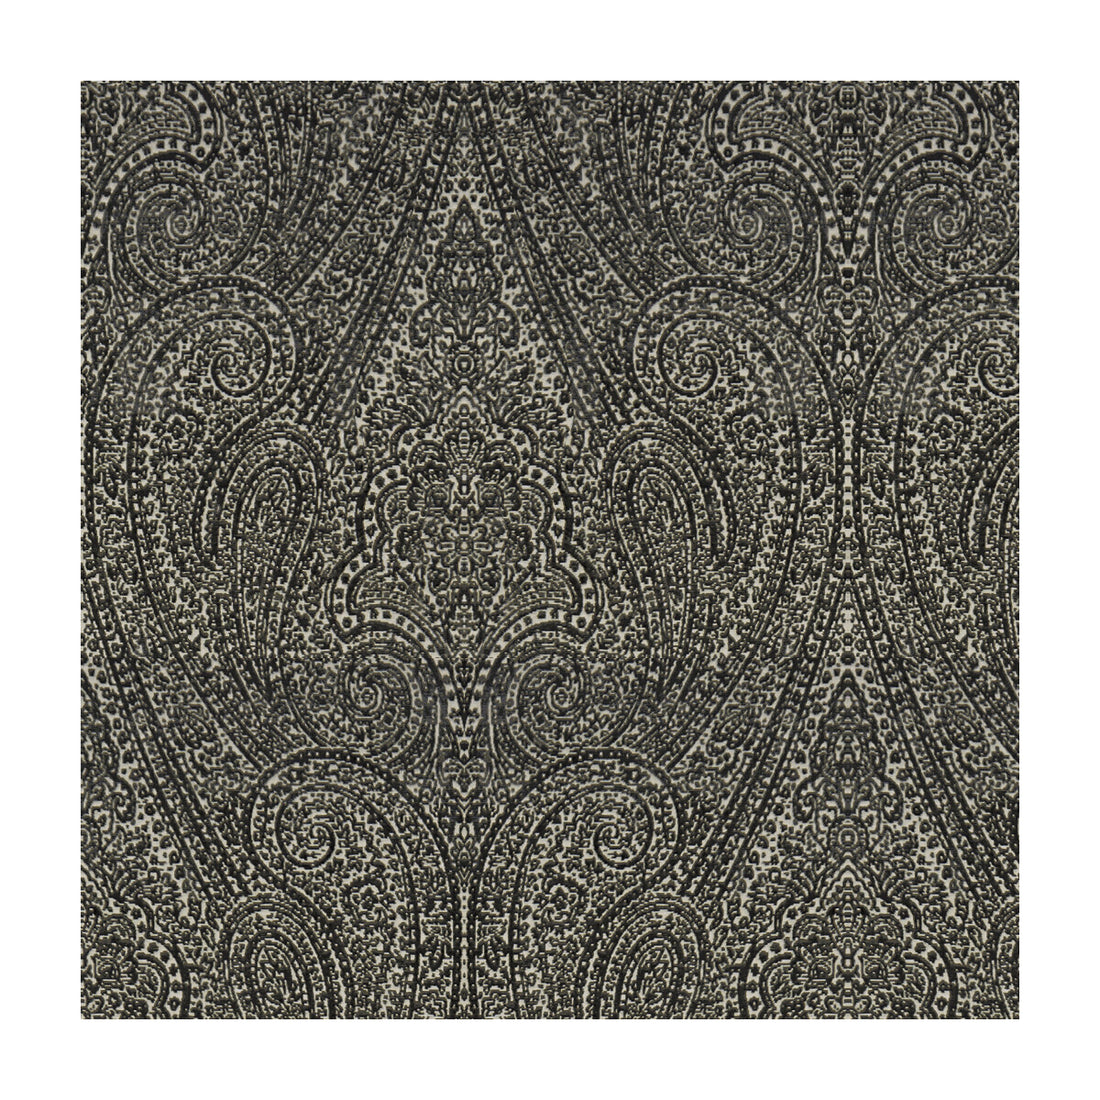 Paisley Plush fabric in flint color - pattern 33948.21.0 - by Kravet Couture in the Modern Luxe II collection